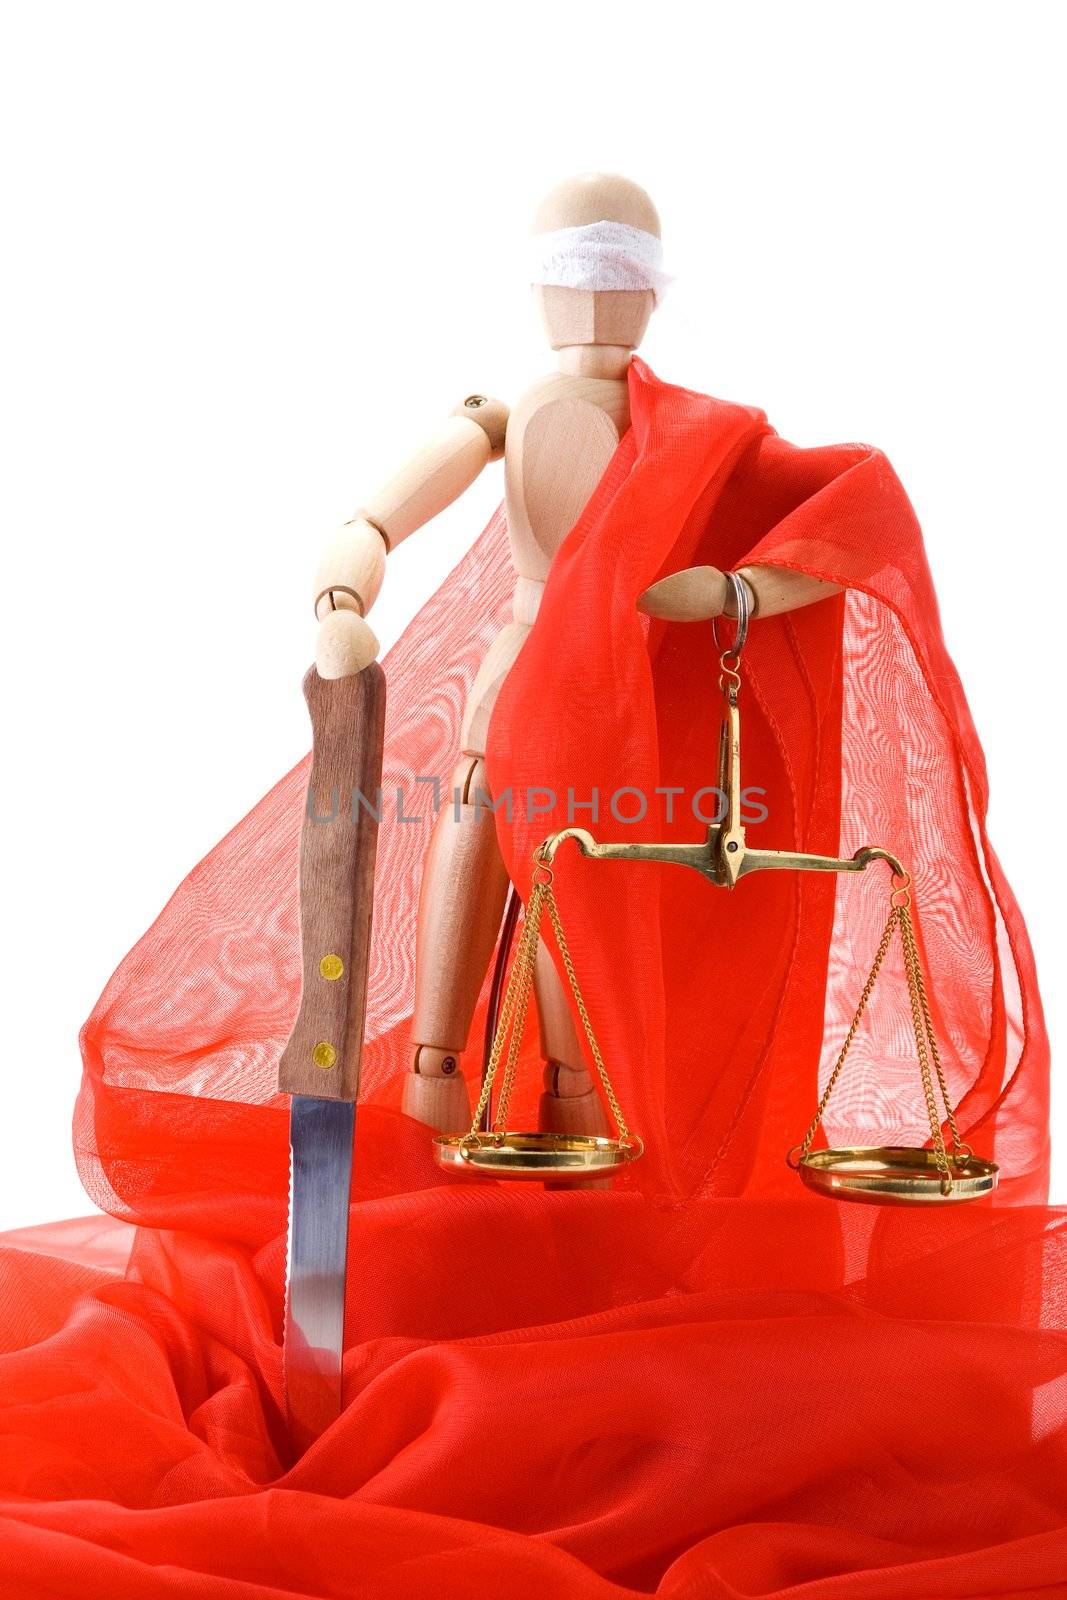 Wooden mannequin, a knife and scales on white background. The joke on the theme of Themis - Greek Goddess of Justice